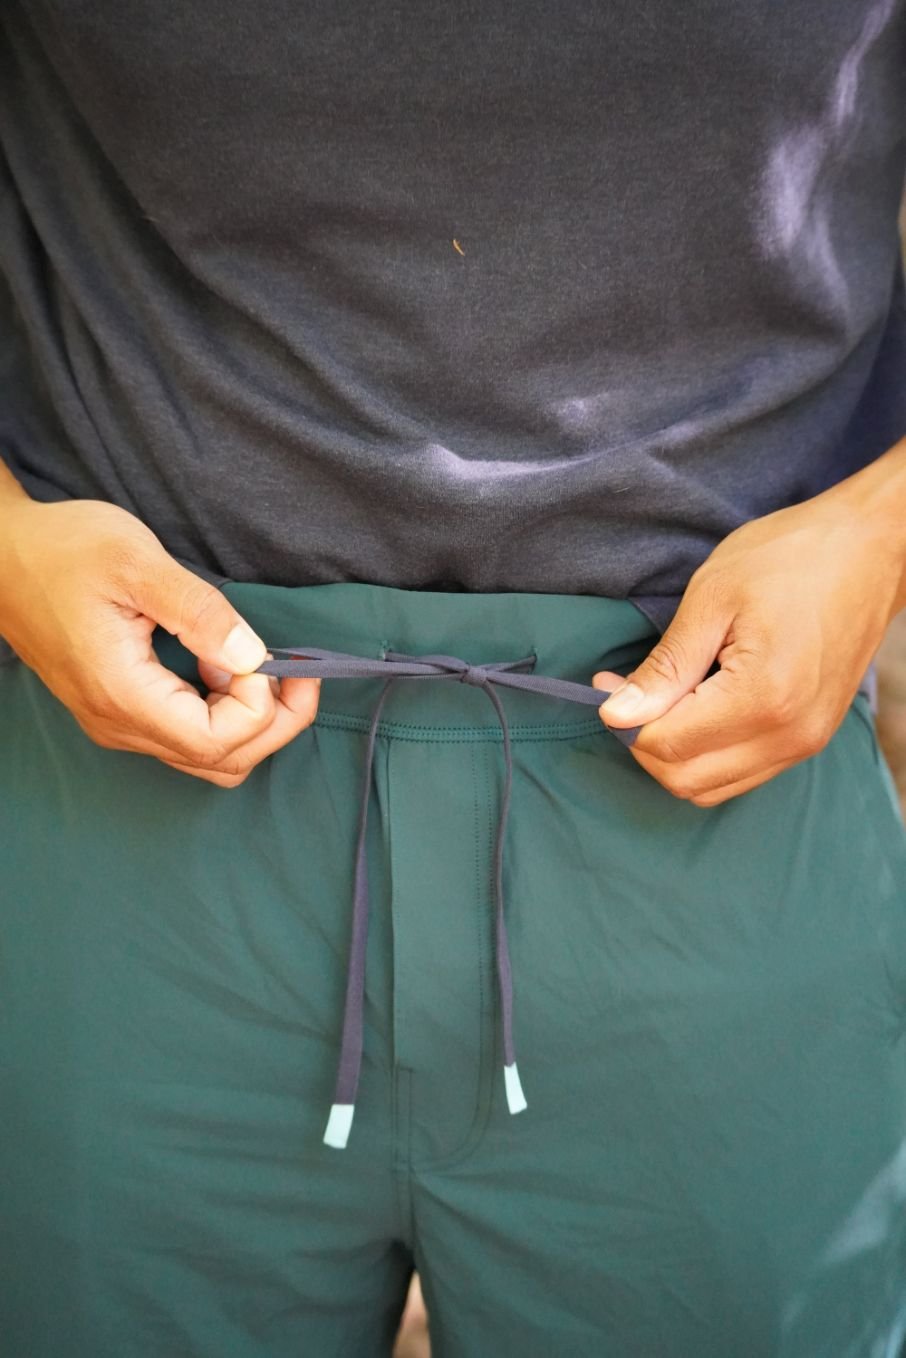 A close-up of the drawstring of the Cotopaxi Veza Adventure pants